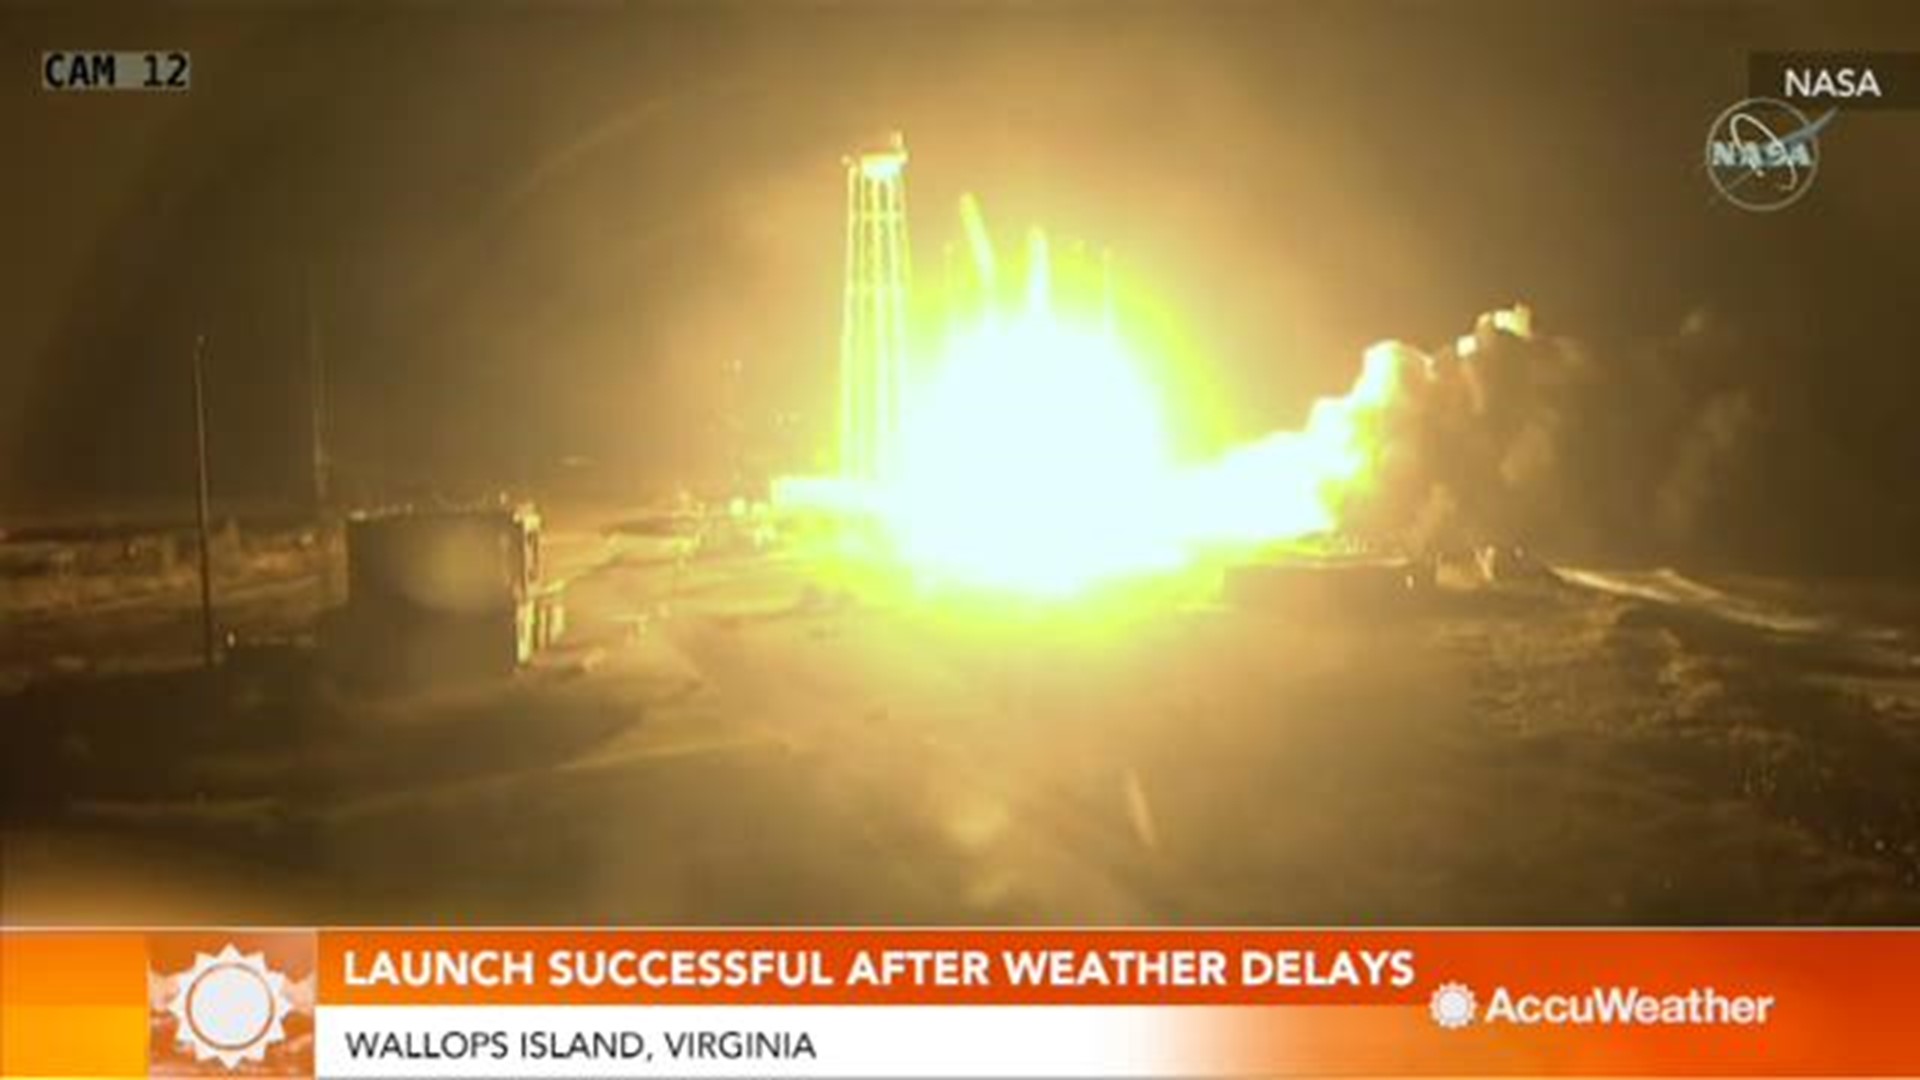 After being delayed for two days by bad weather, NASA successfully launched the Antares rocket.  It is carrying the Cygnus spacecraft on a re-supply mission to the International Space Station to deliver food and science equipments.